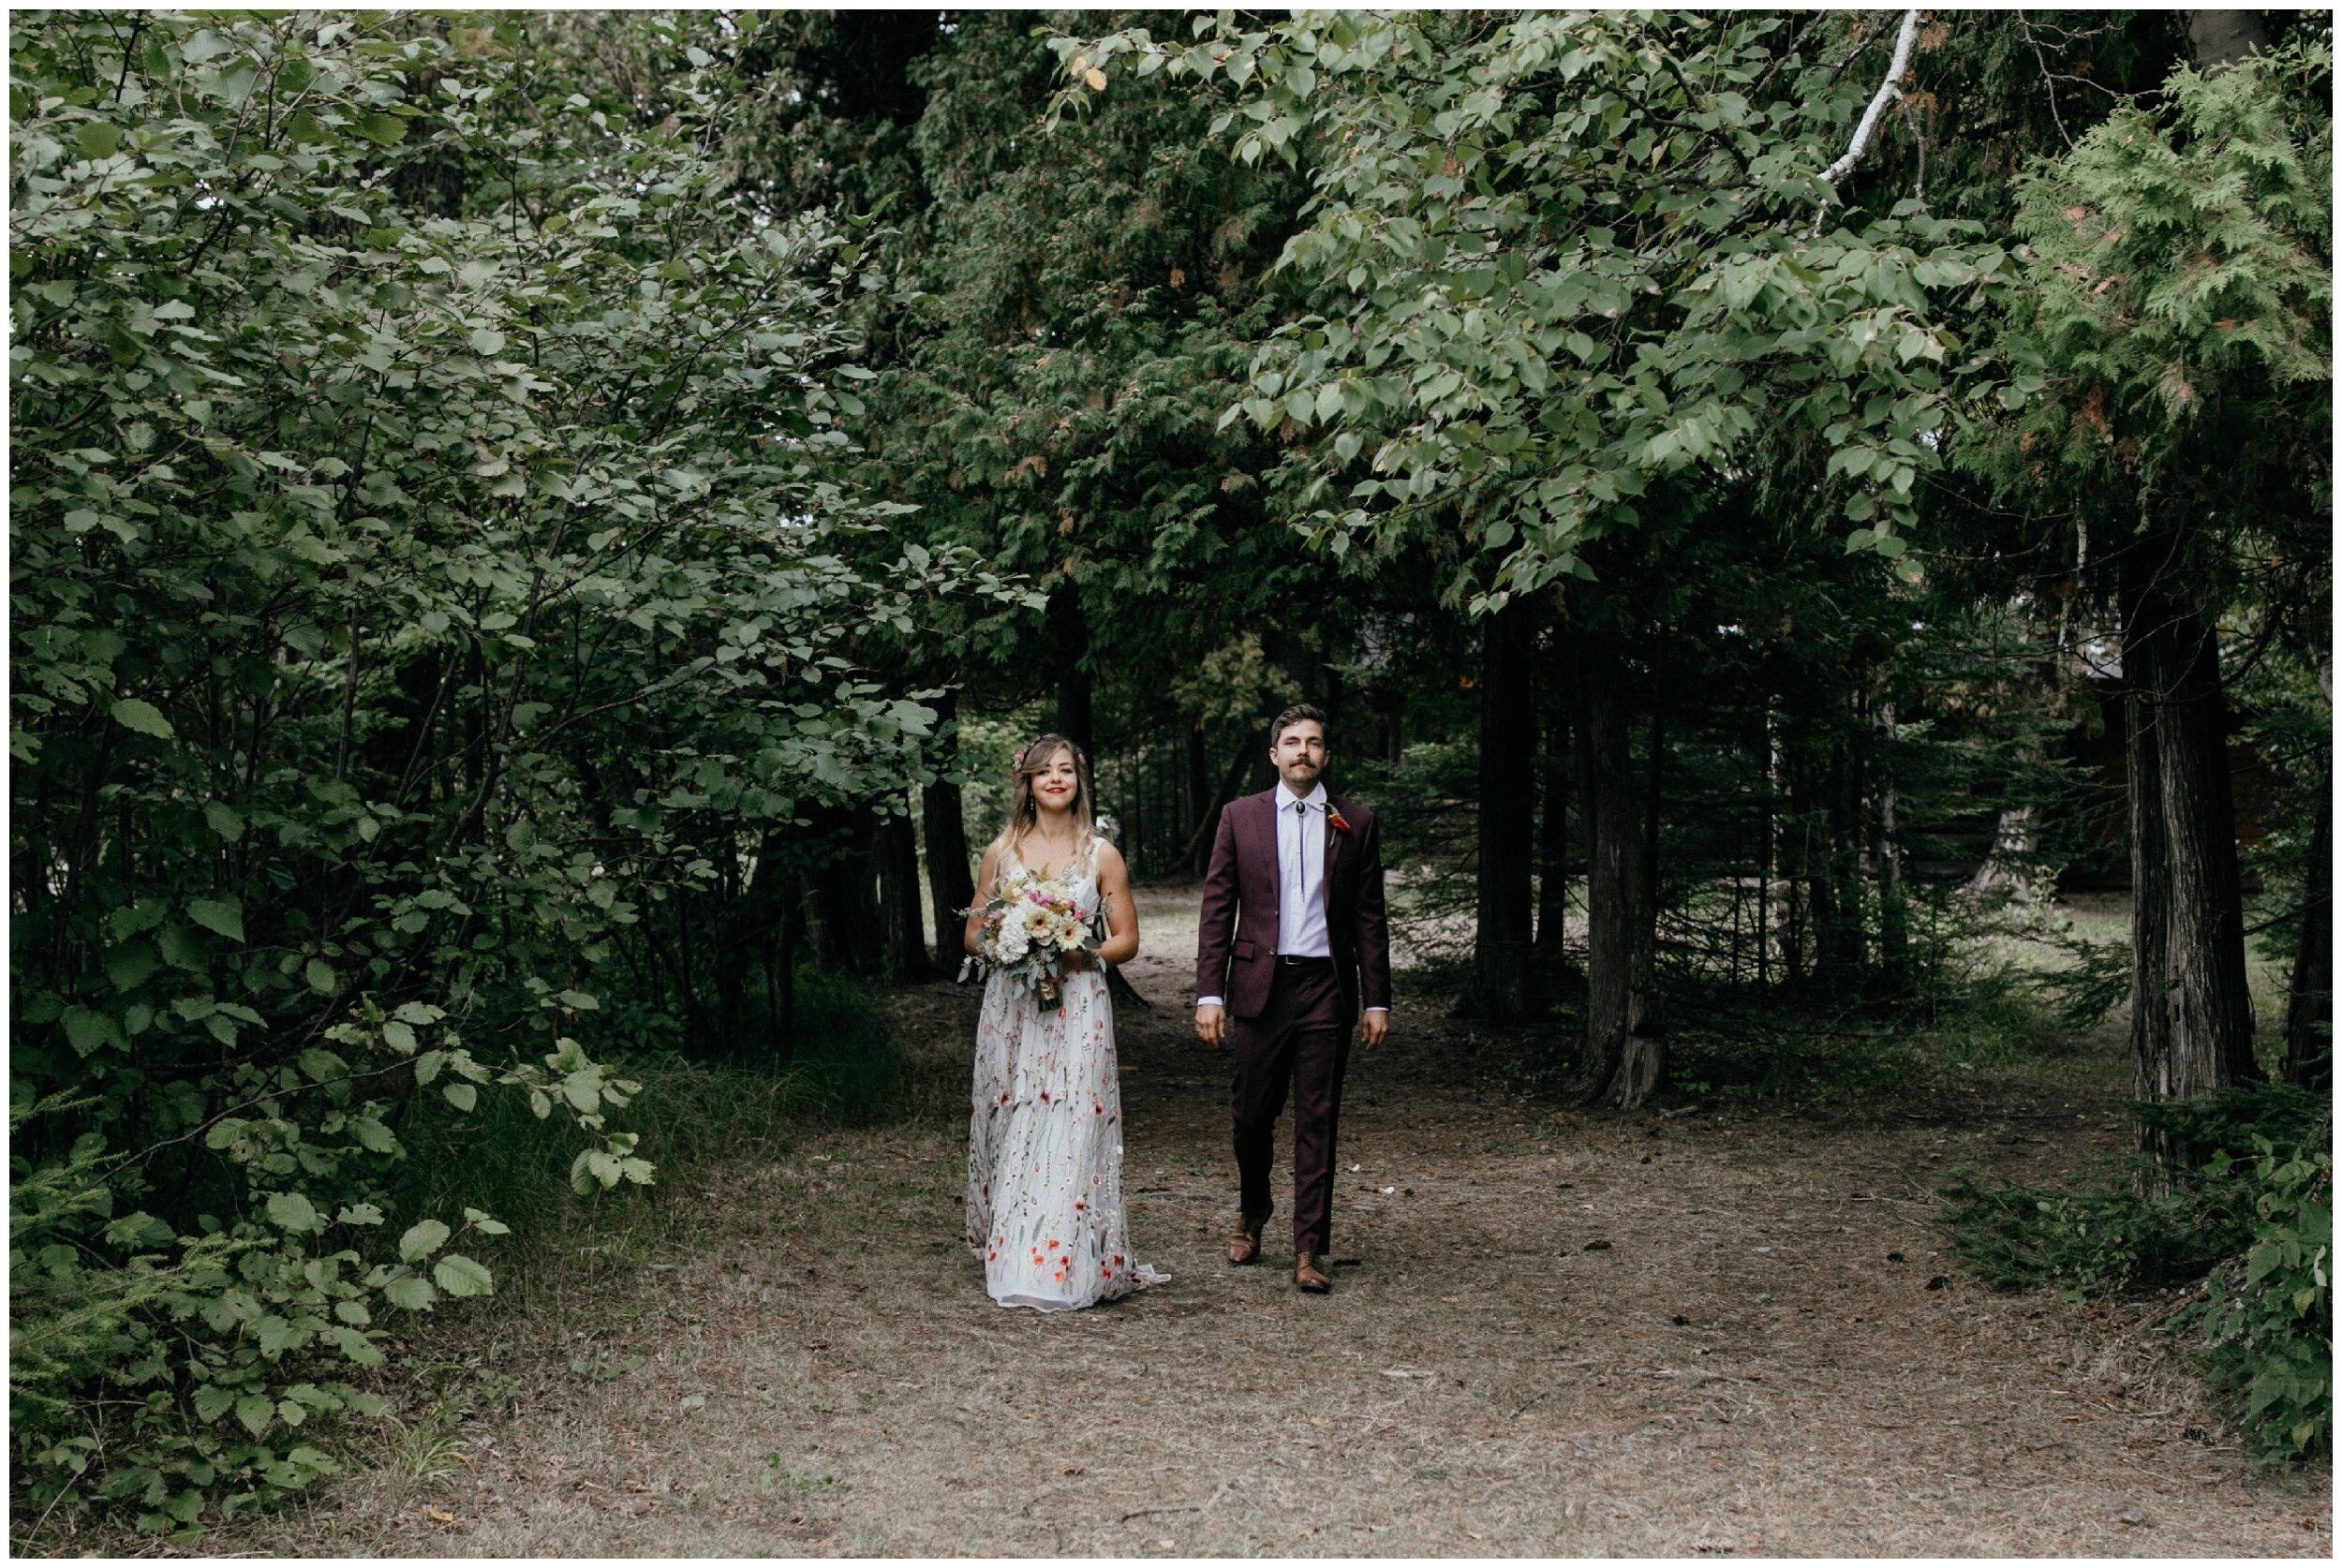 Bride and groom walking together during ceremony processional at summer camp wedding on half moon lake in Eveleth Minnesota